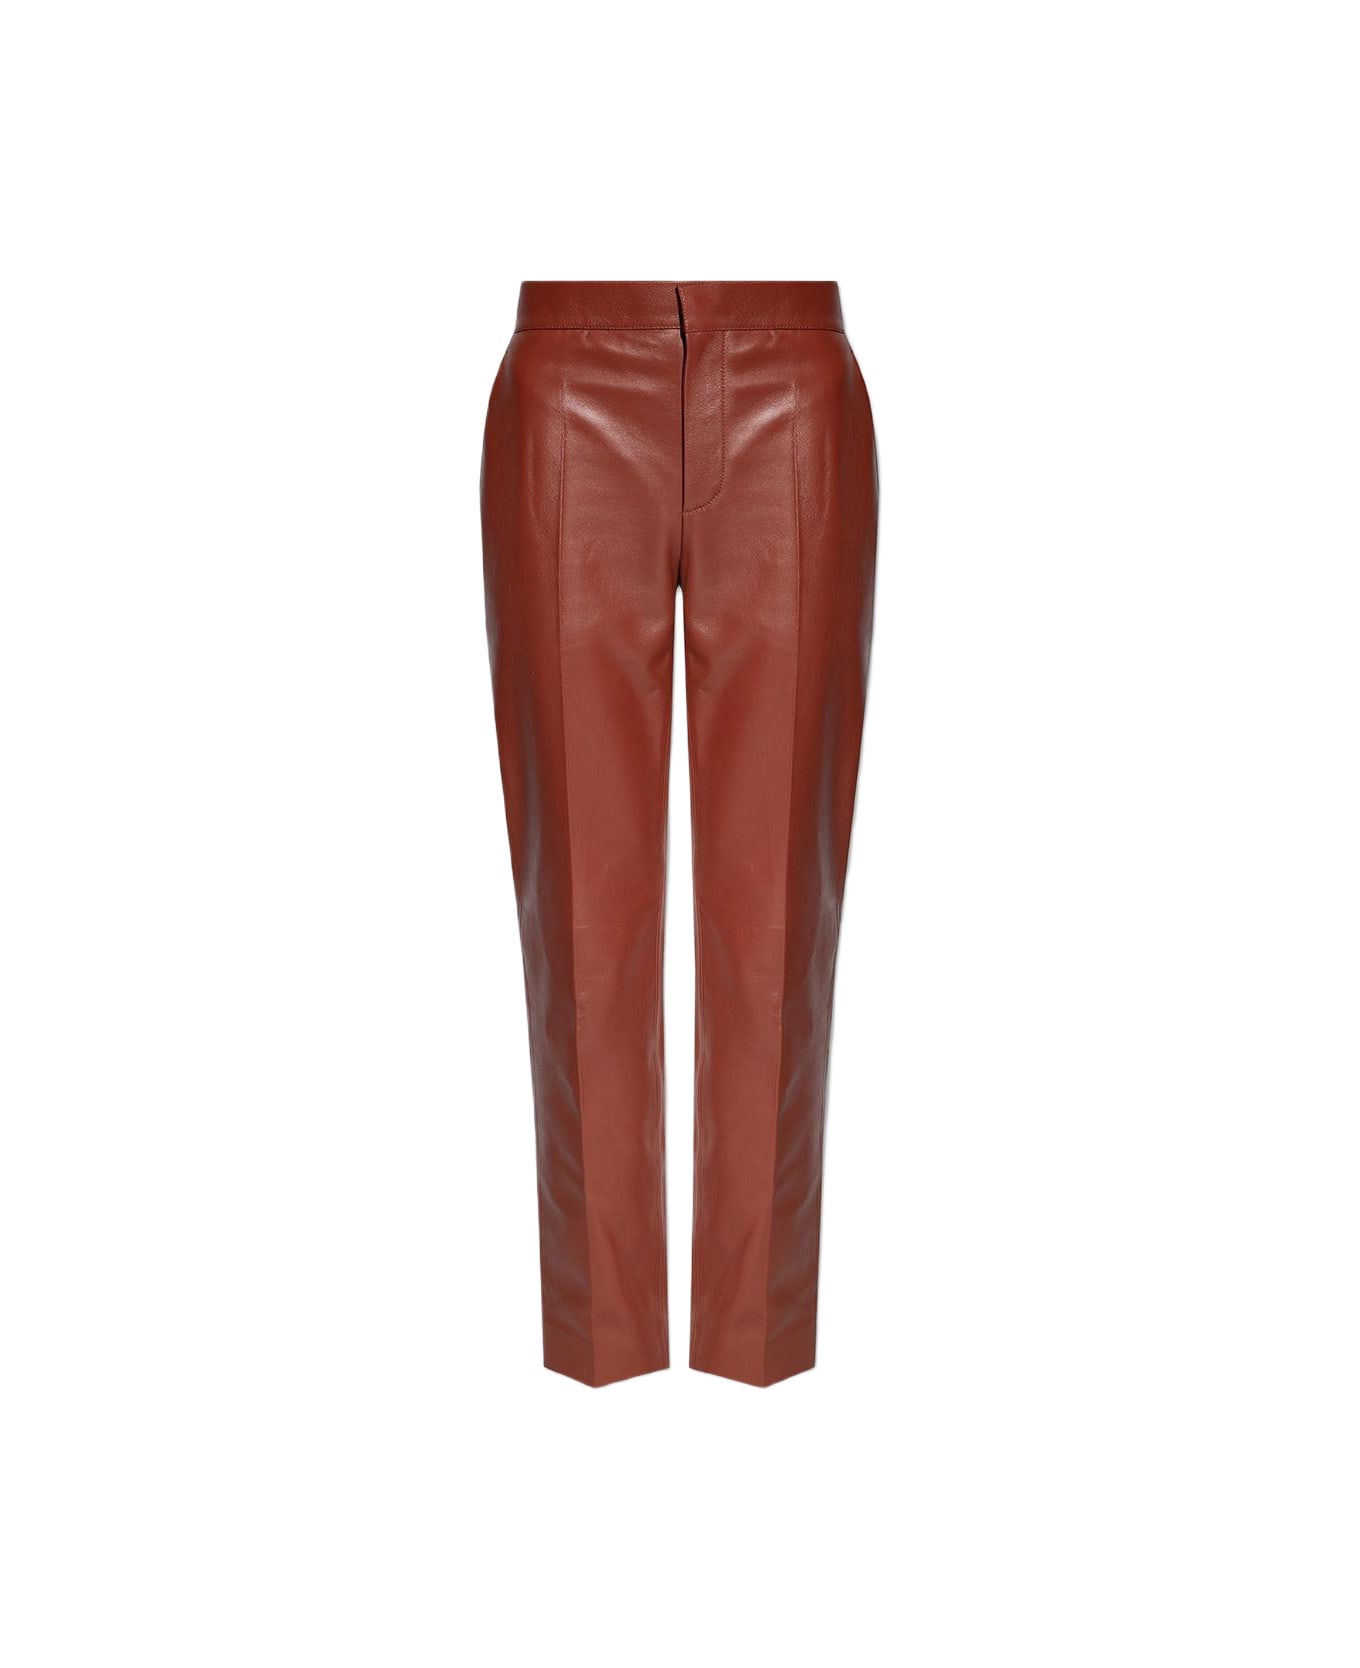 Chloé Leather Trousers - Brown ボトムス